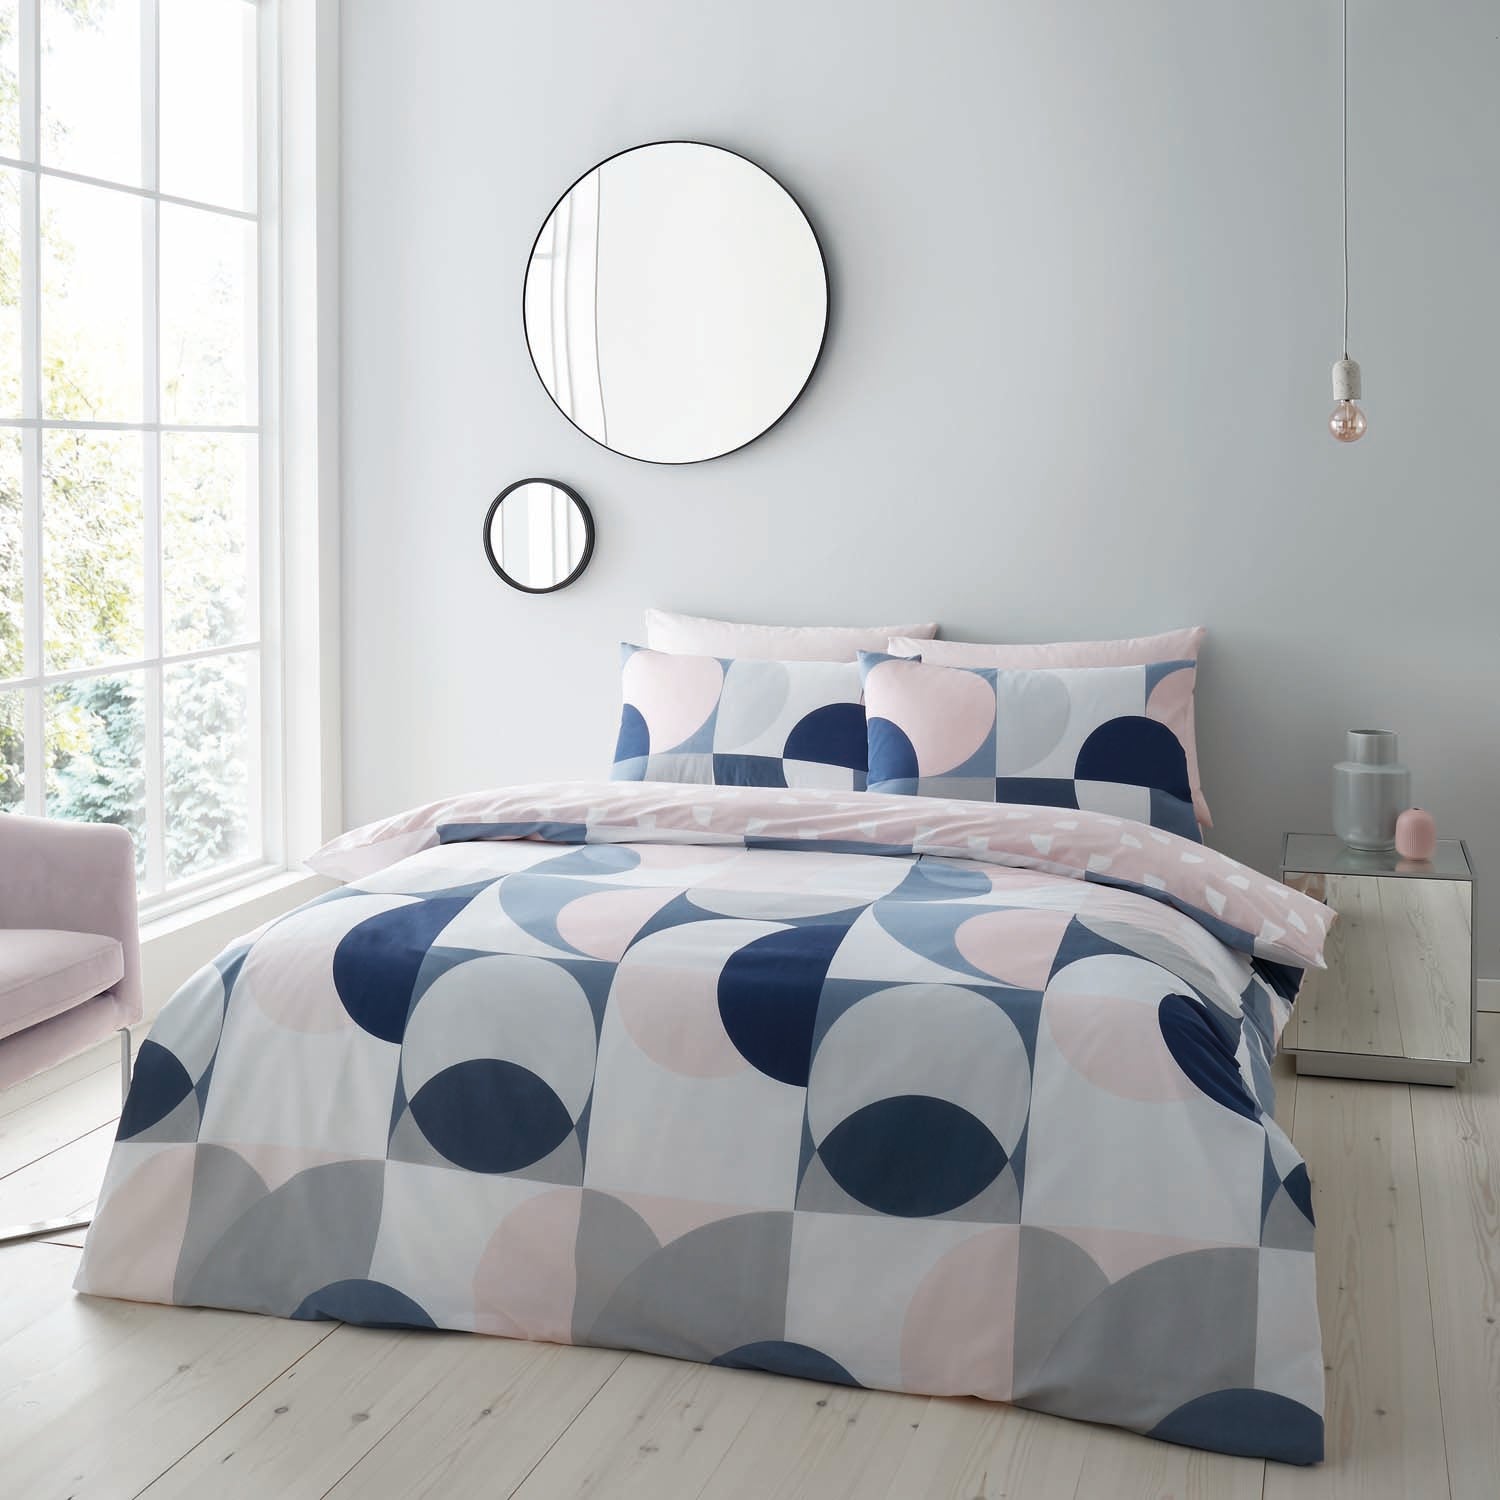  Catherine Lansfield Sirkel Geo Easy Care Duvet Cover Set - Blush 1 Shaws Department Stores